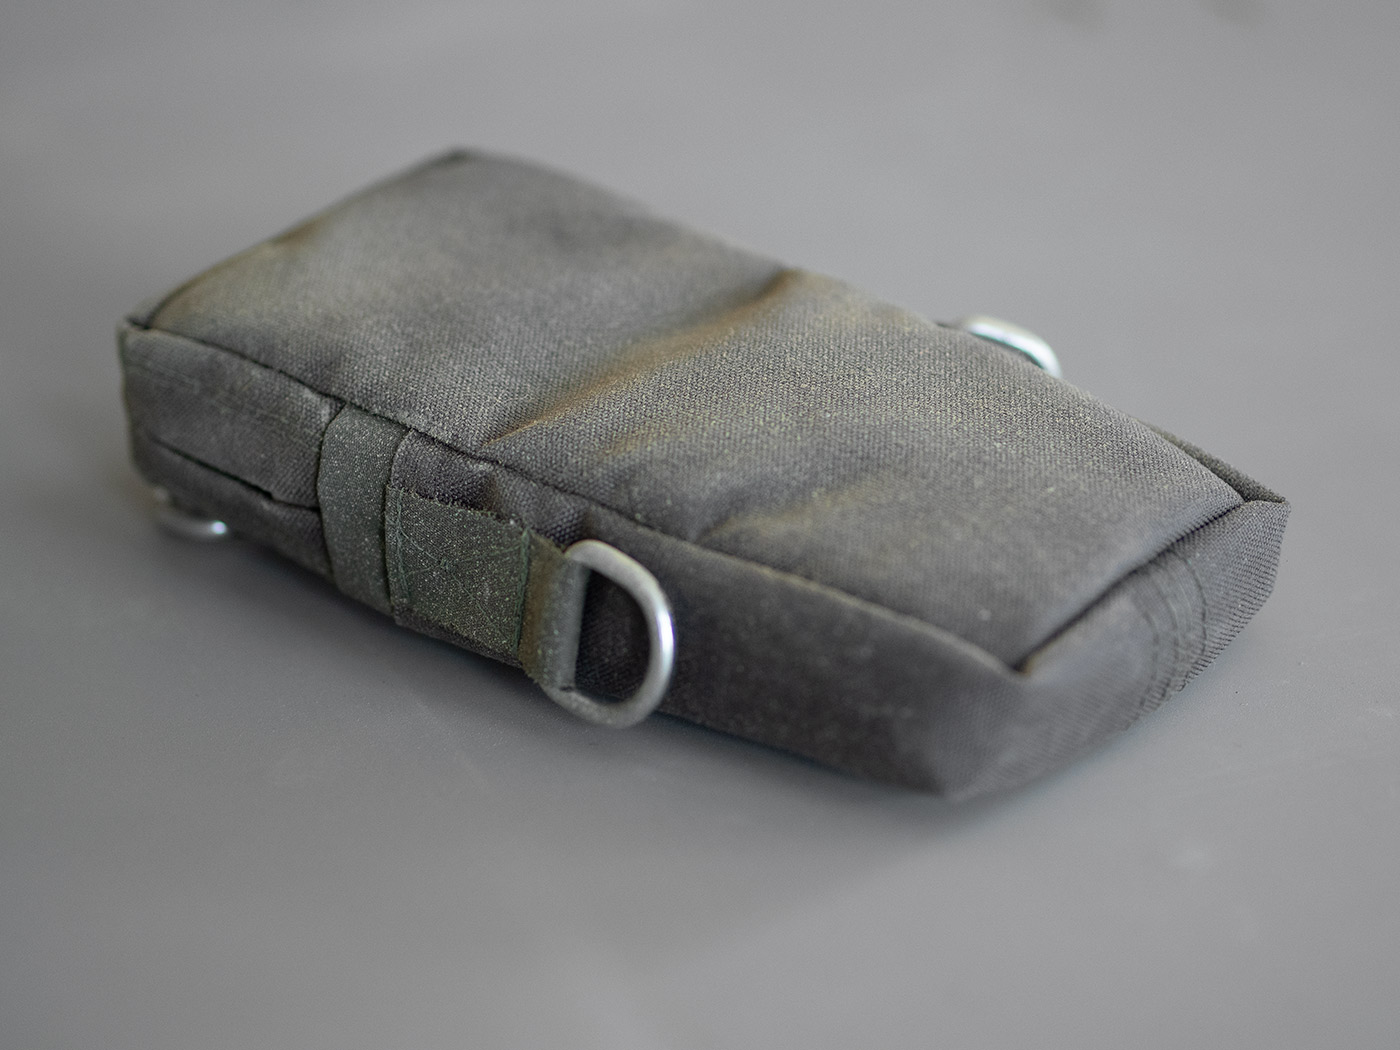 A green-grey shoulder bag with galvanized metal d-rings. The bag has an aspect ratio of 1:2.